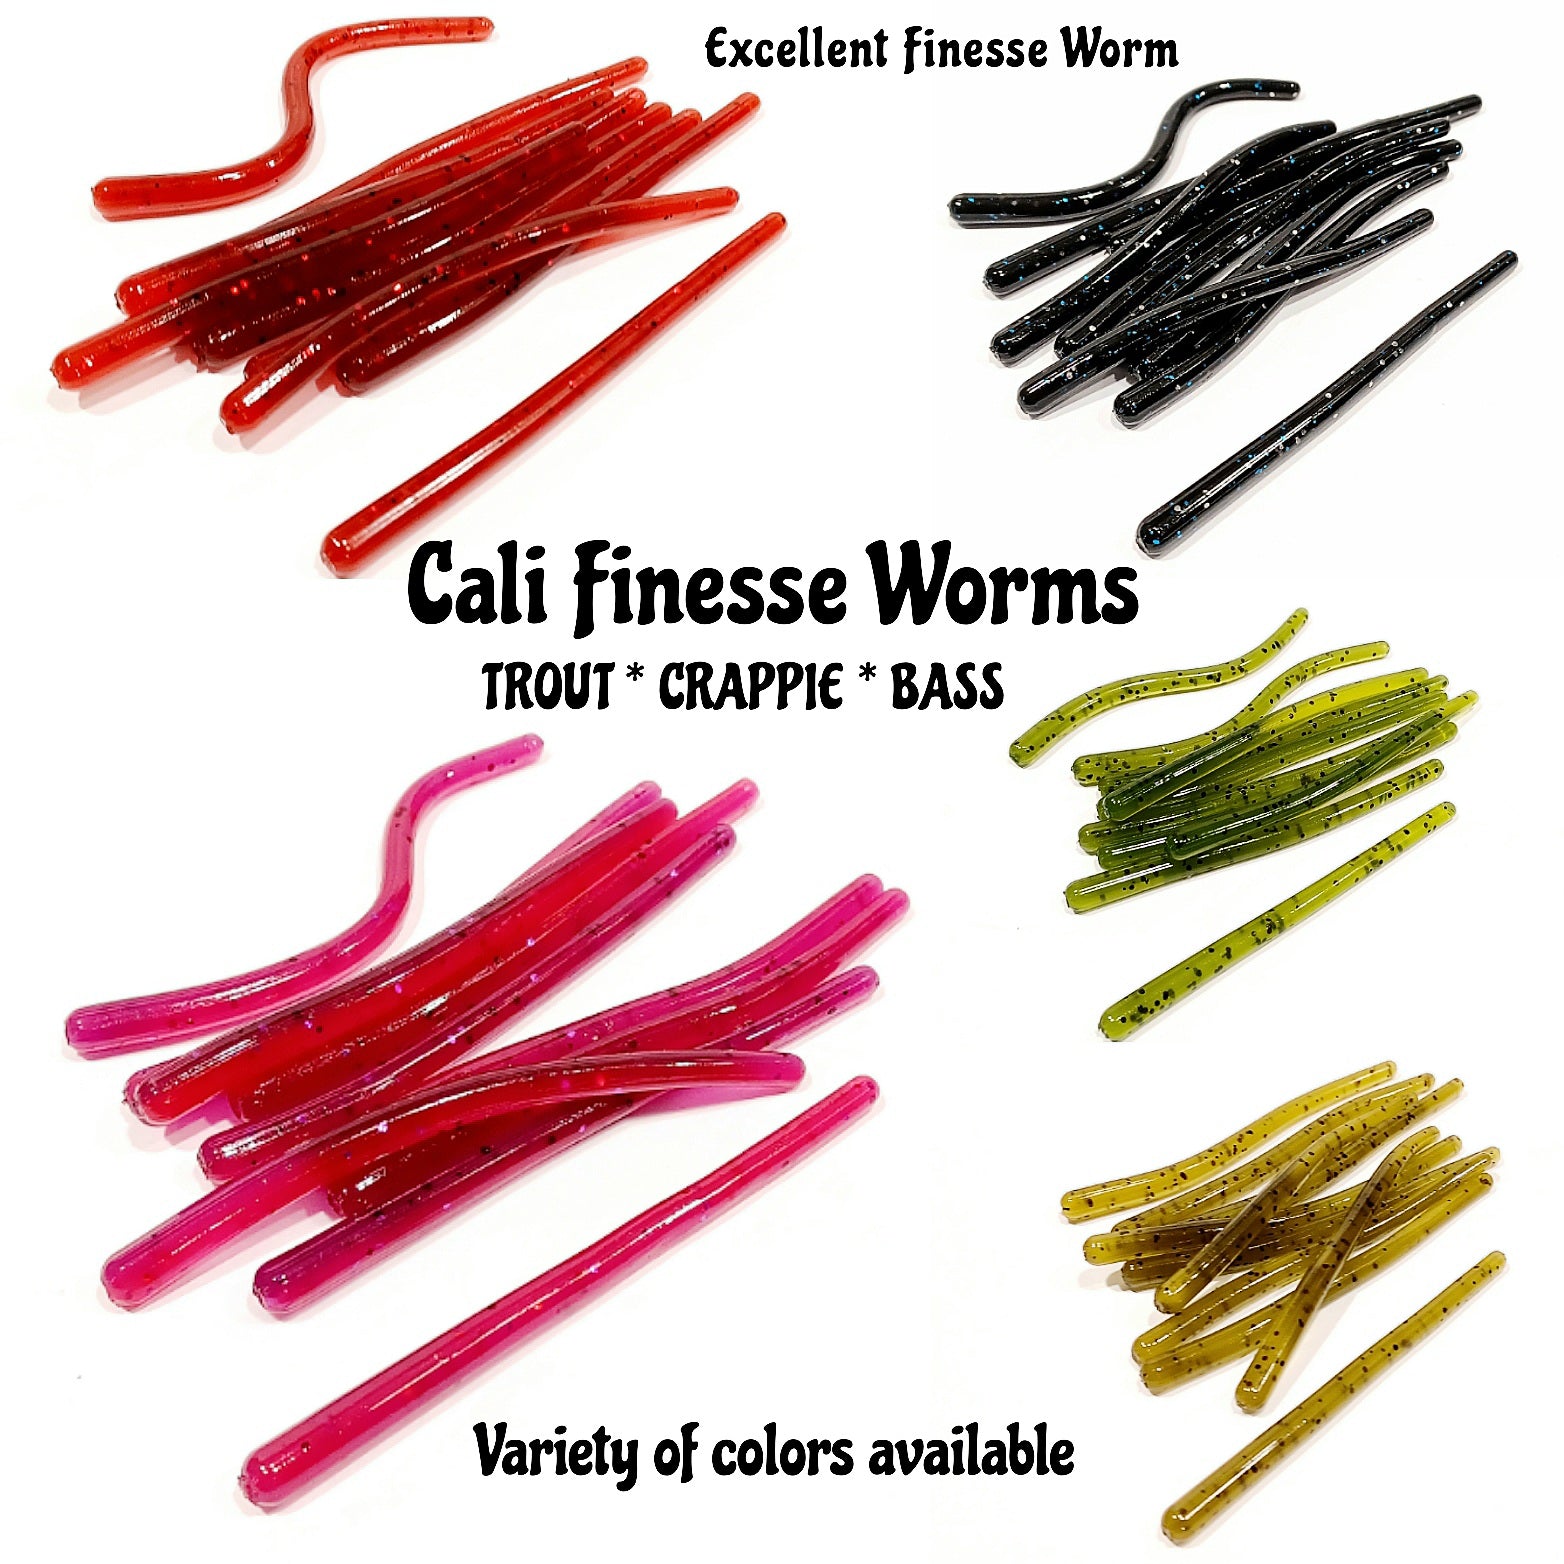 CALI FINESSE WORMS (Trout Crappie & Bass) Our Light Line Series